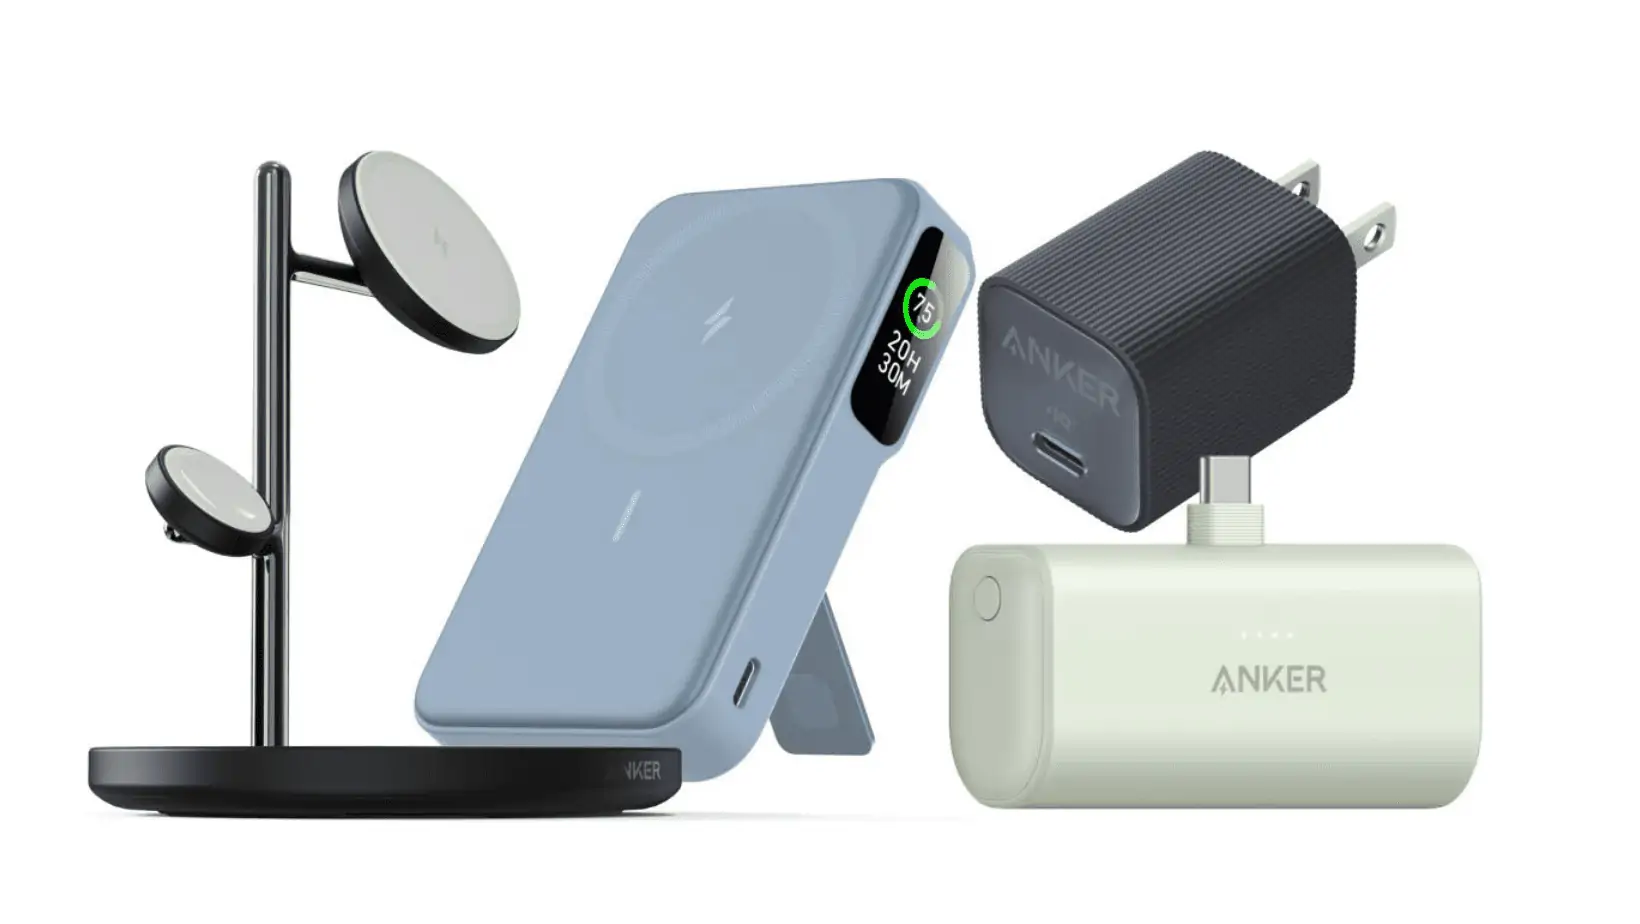 Anker’s Game-Changing Charging Tech: Faster and Smarter